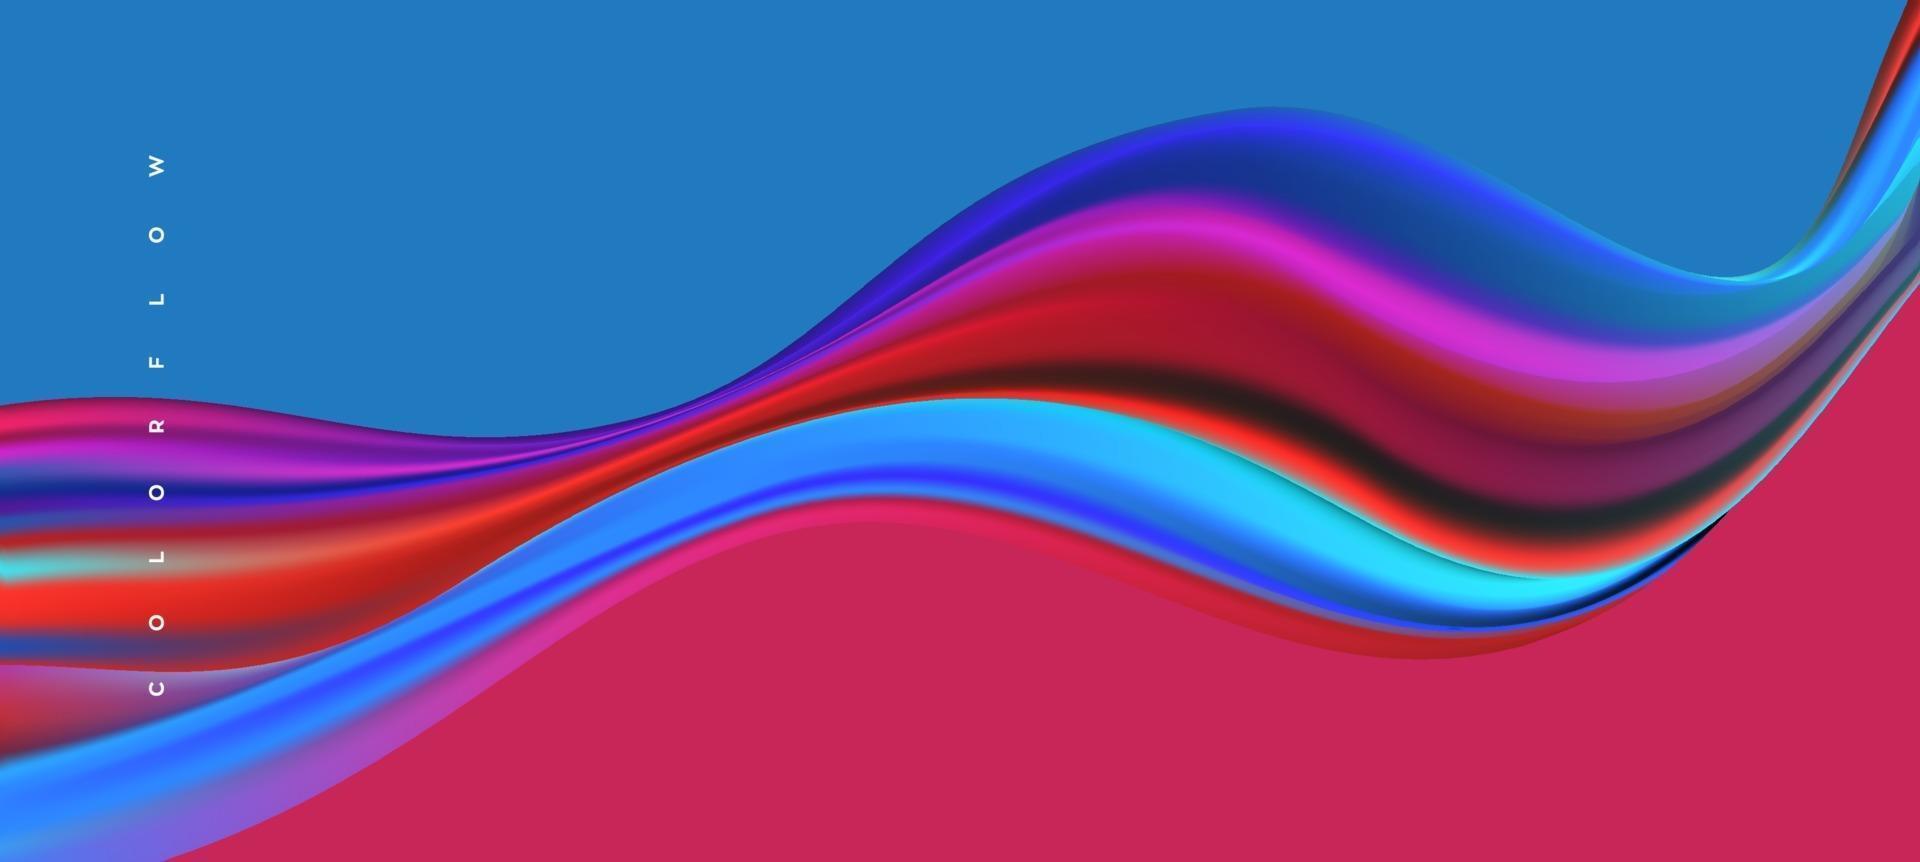 Abstract colorful fluid background design vector